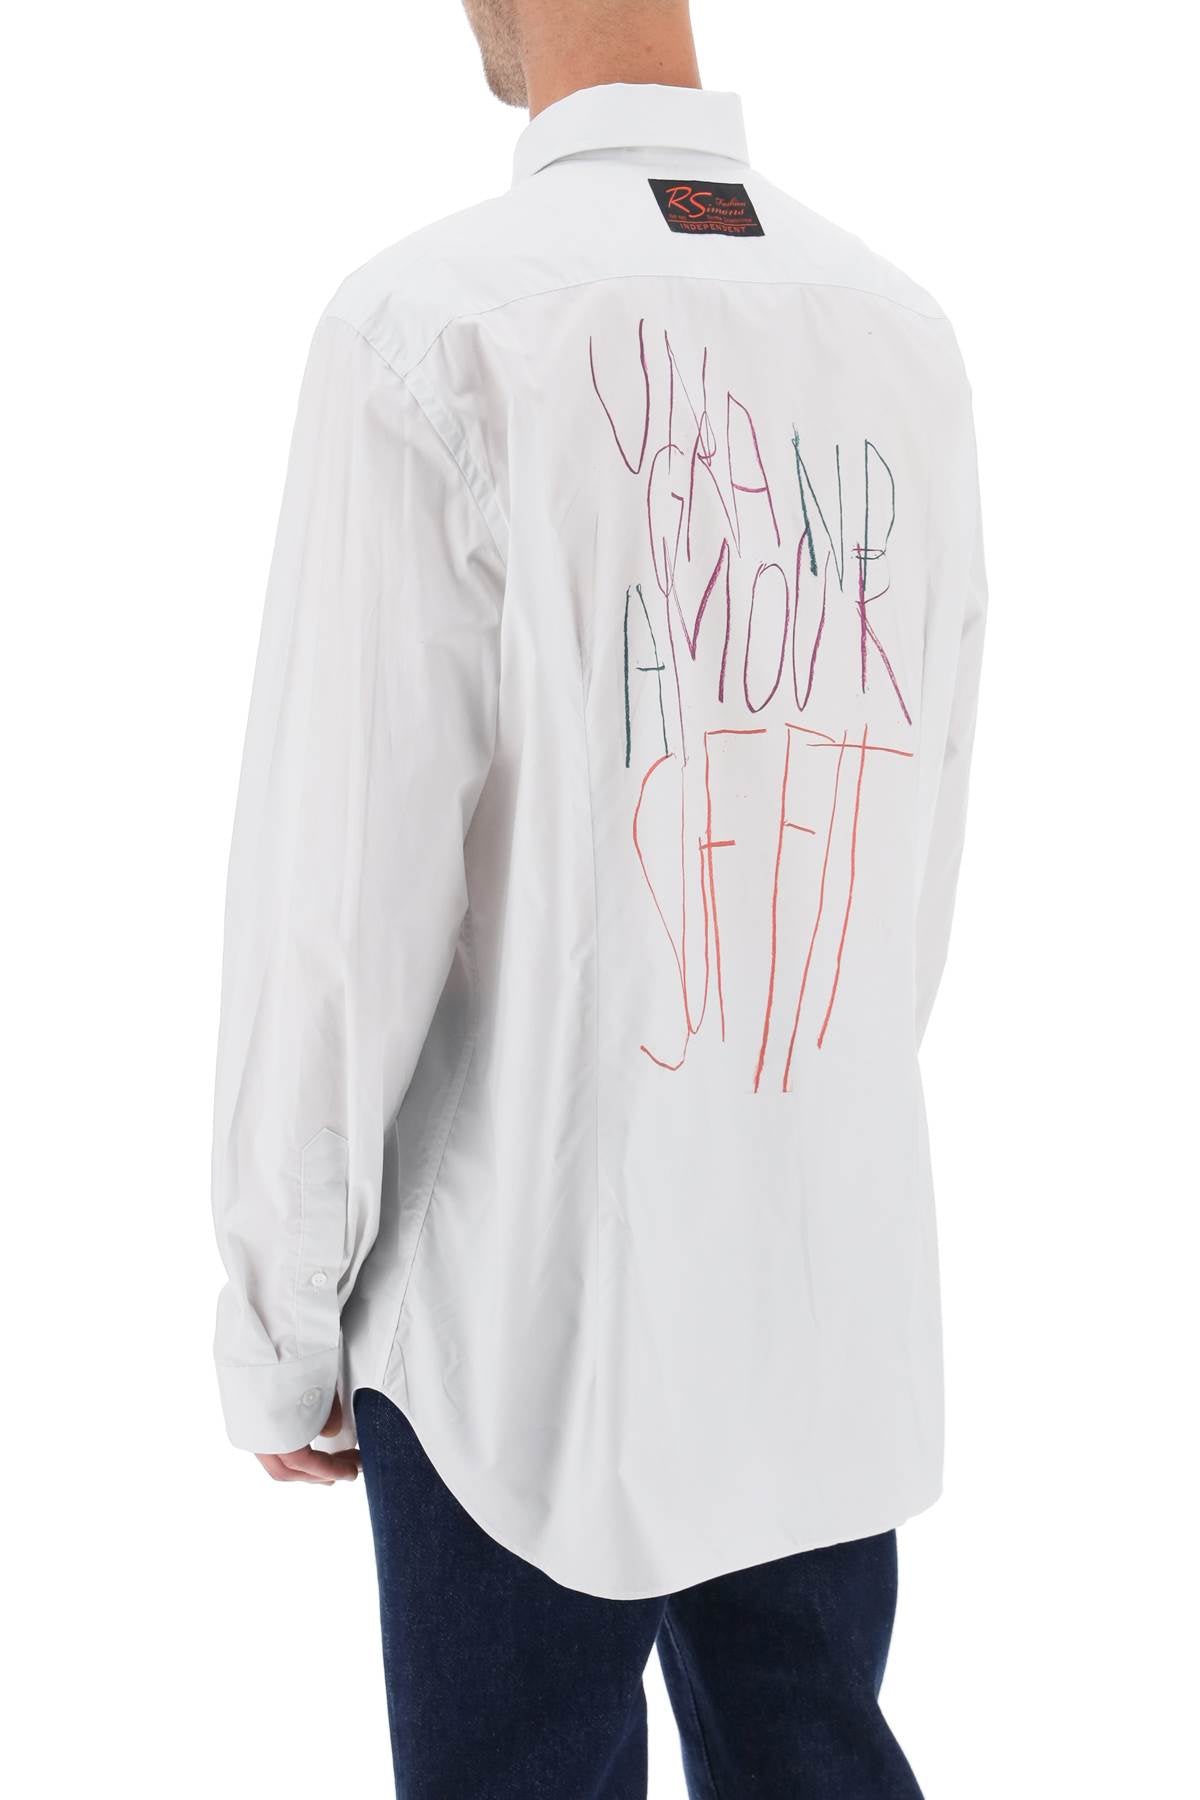 RAF SIMONS Classic White Shirt for Men - SS23 Collection